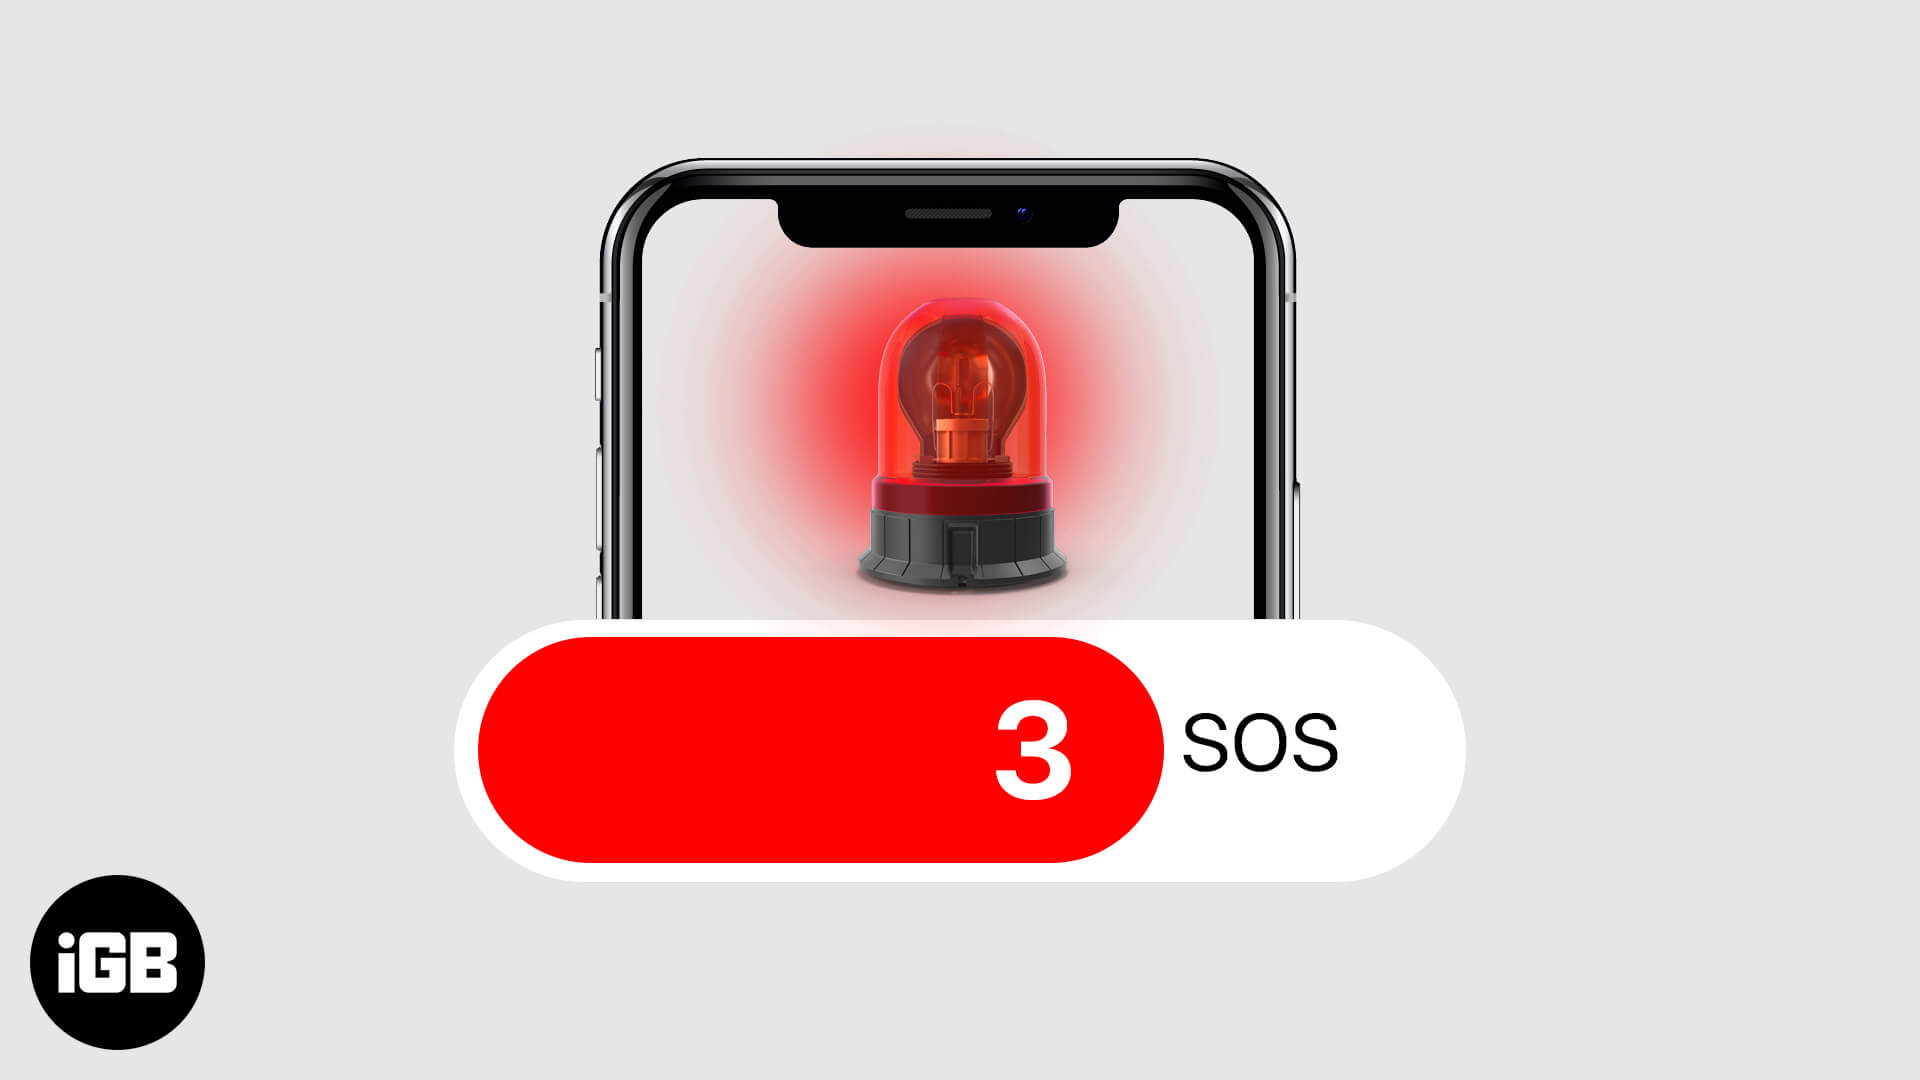 How to use emergency sos on iphone